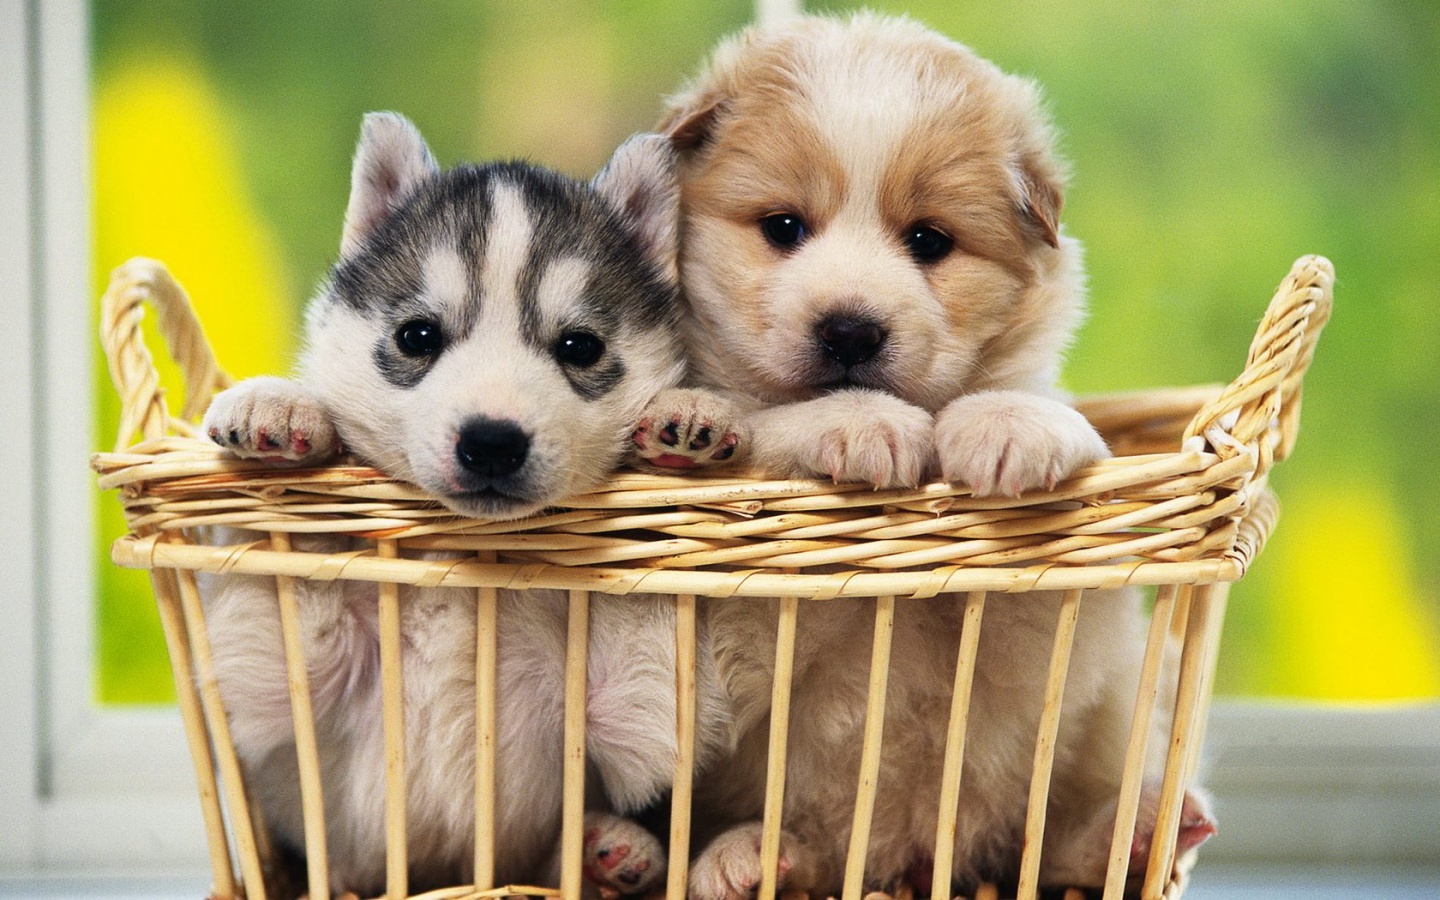 Free download Cute Dogs Wallpaper Download Cute Dogs Wallpaper for Desktop [1440x900] for your Desktop, Mobile & Tablet. Explore Cute Puppy Wallpaper For Desktop. Wallpaper Of Puppies, Cute Puppies